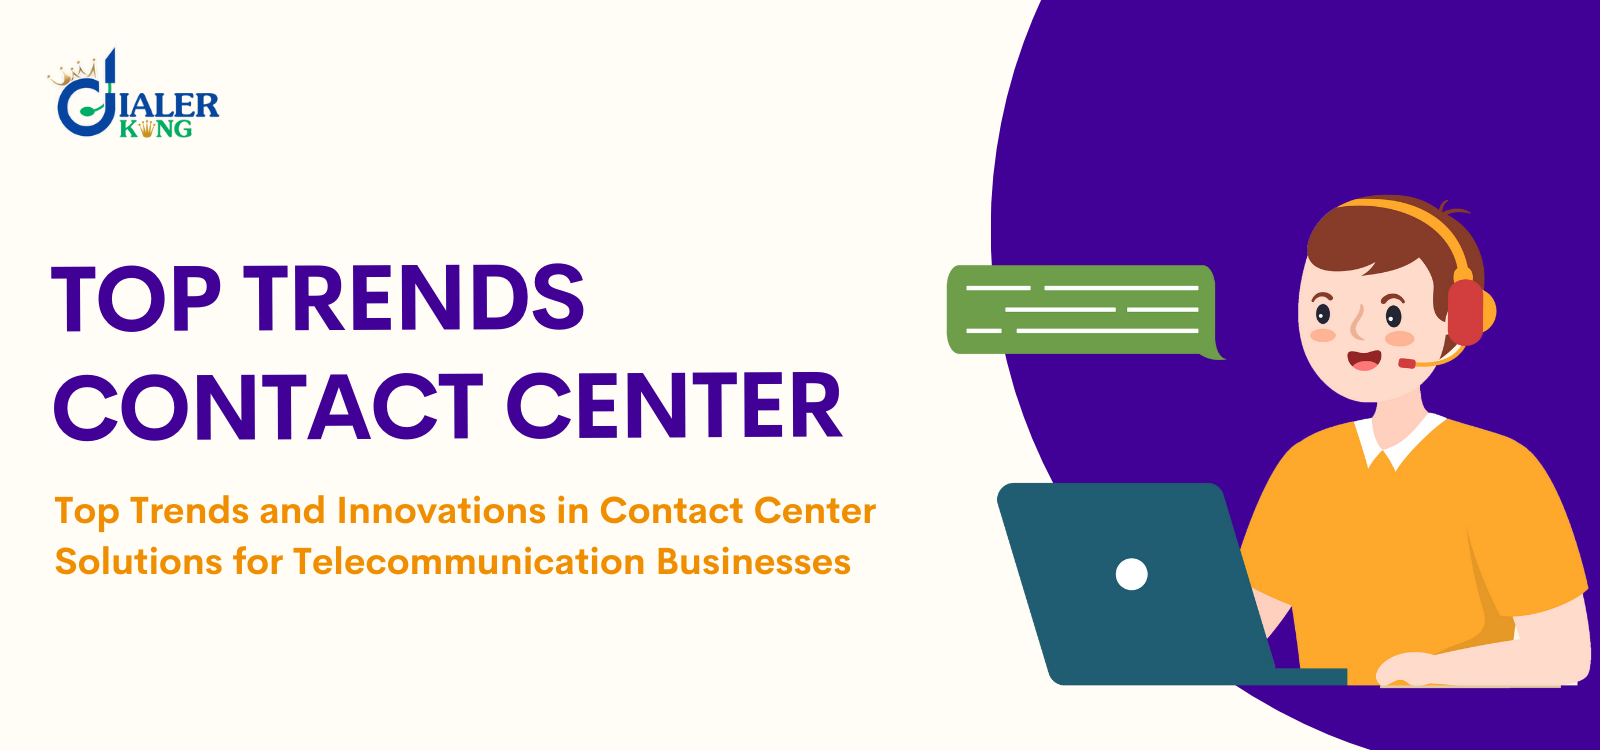 Top Trends Contact Center